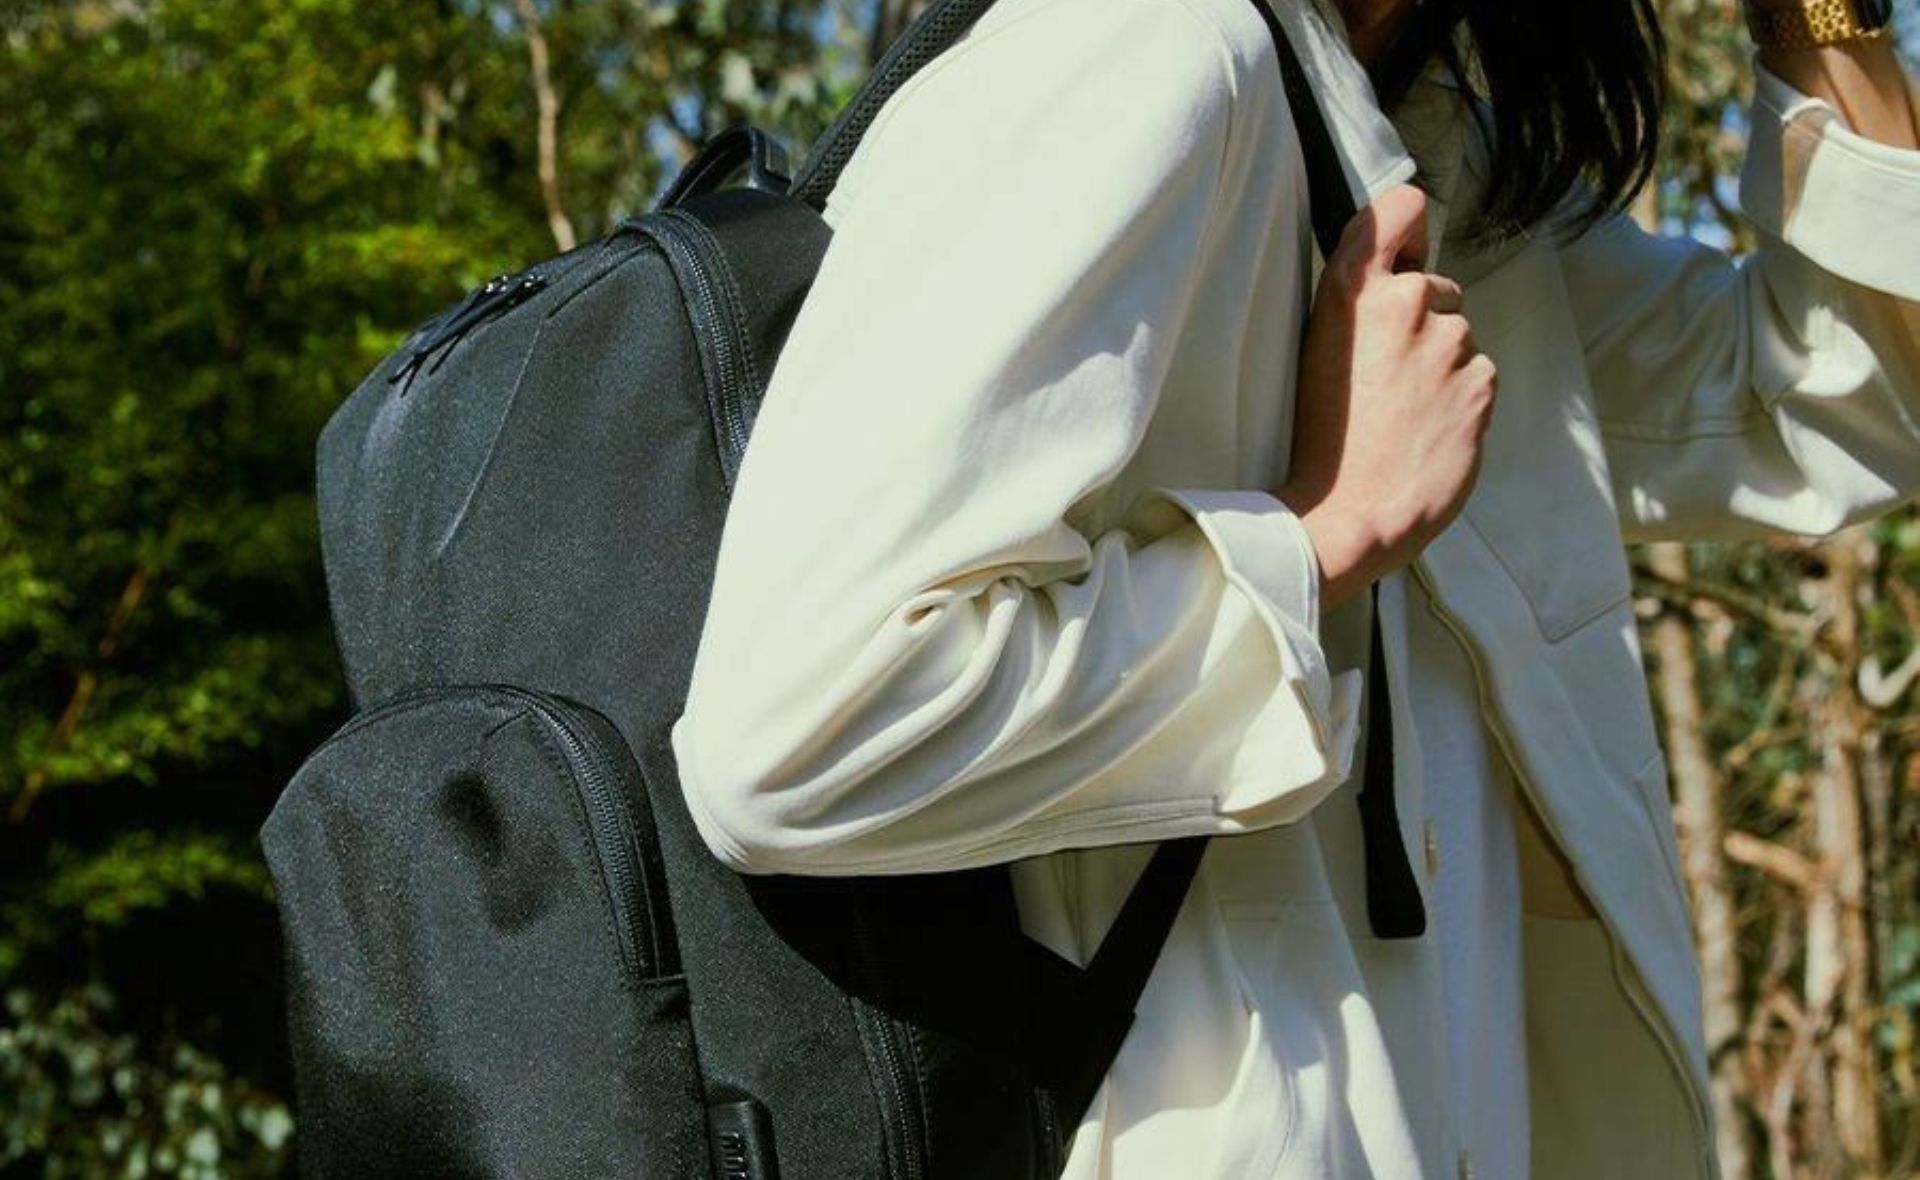 The best large backpacks for any occasion that can hold all of the essentials